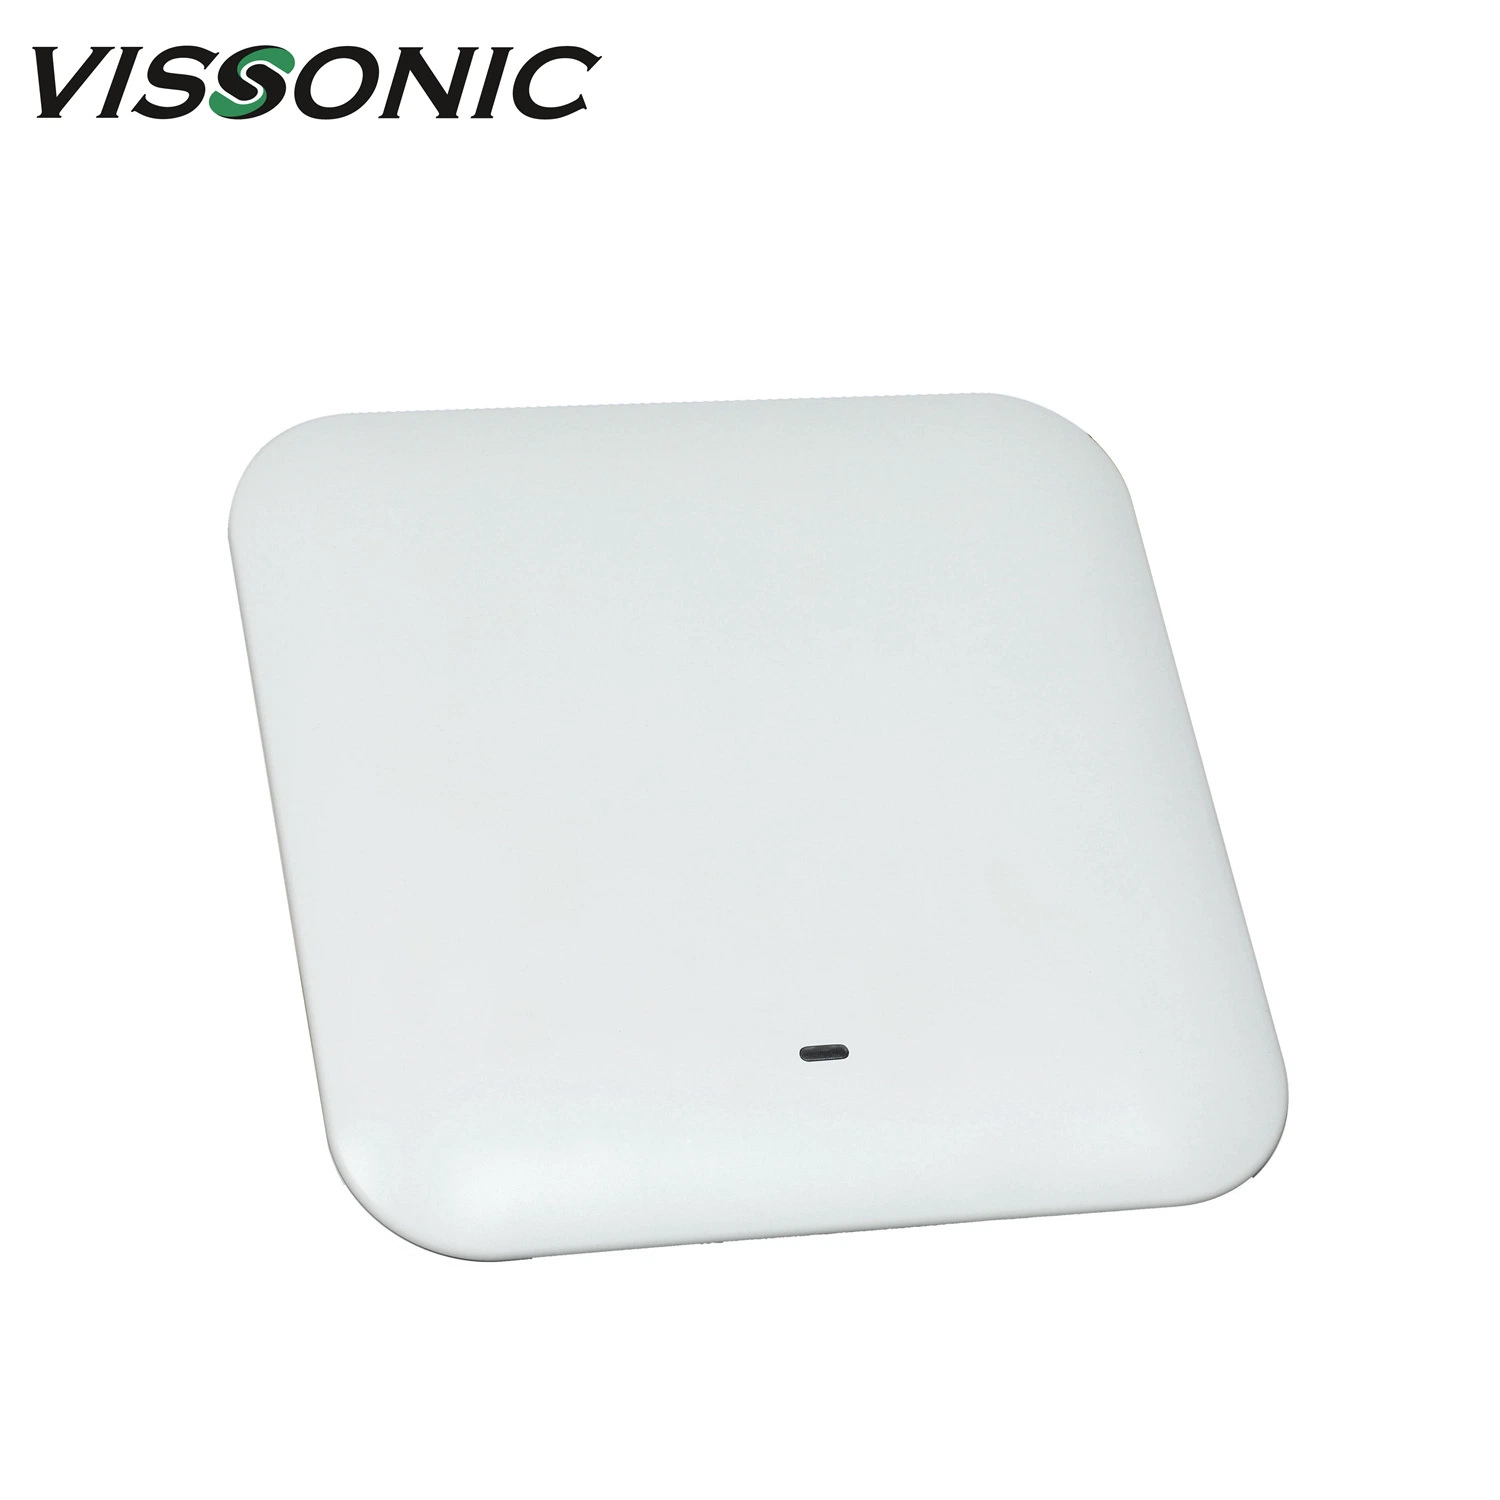 Vissonic 5g WiFi Wireless Ap for Conference Microphone System